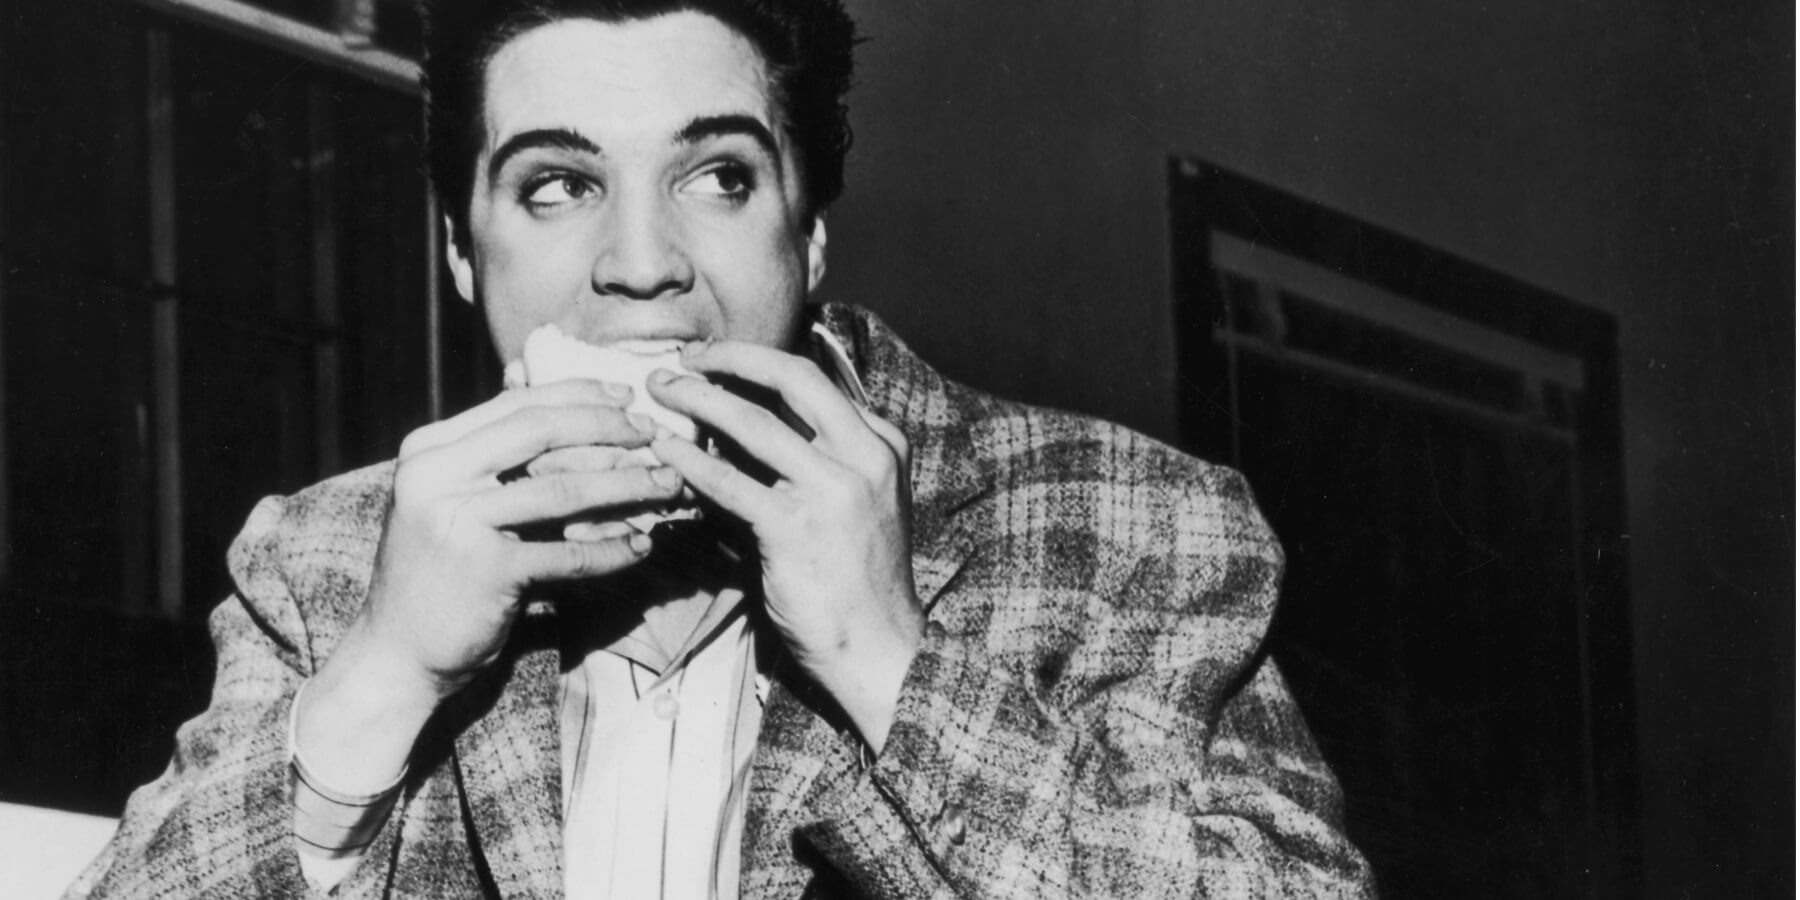 Elvis Presley had access to all types of cuisine but he preferred the Southern foods he grew up on.